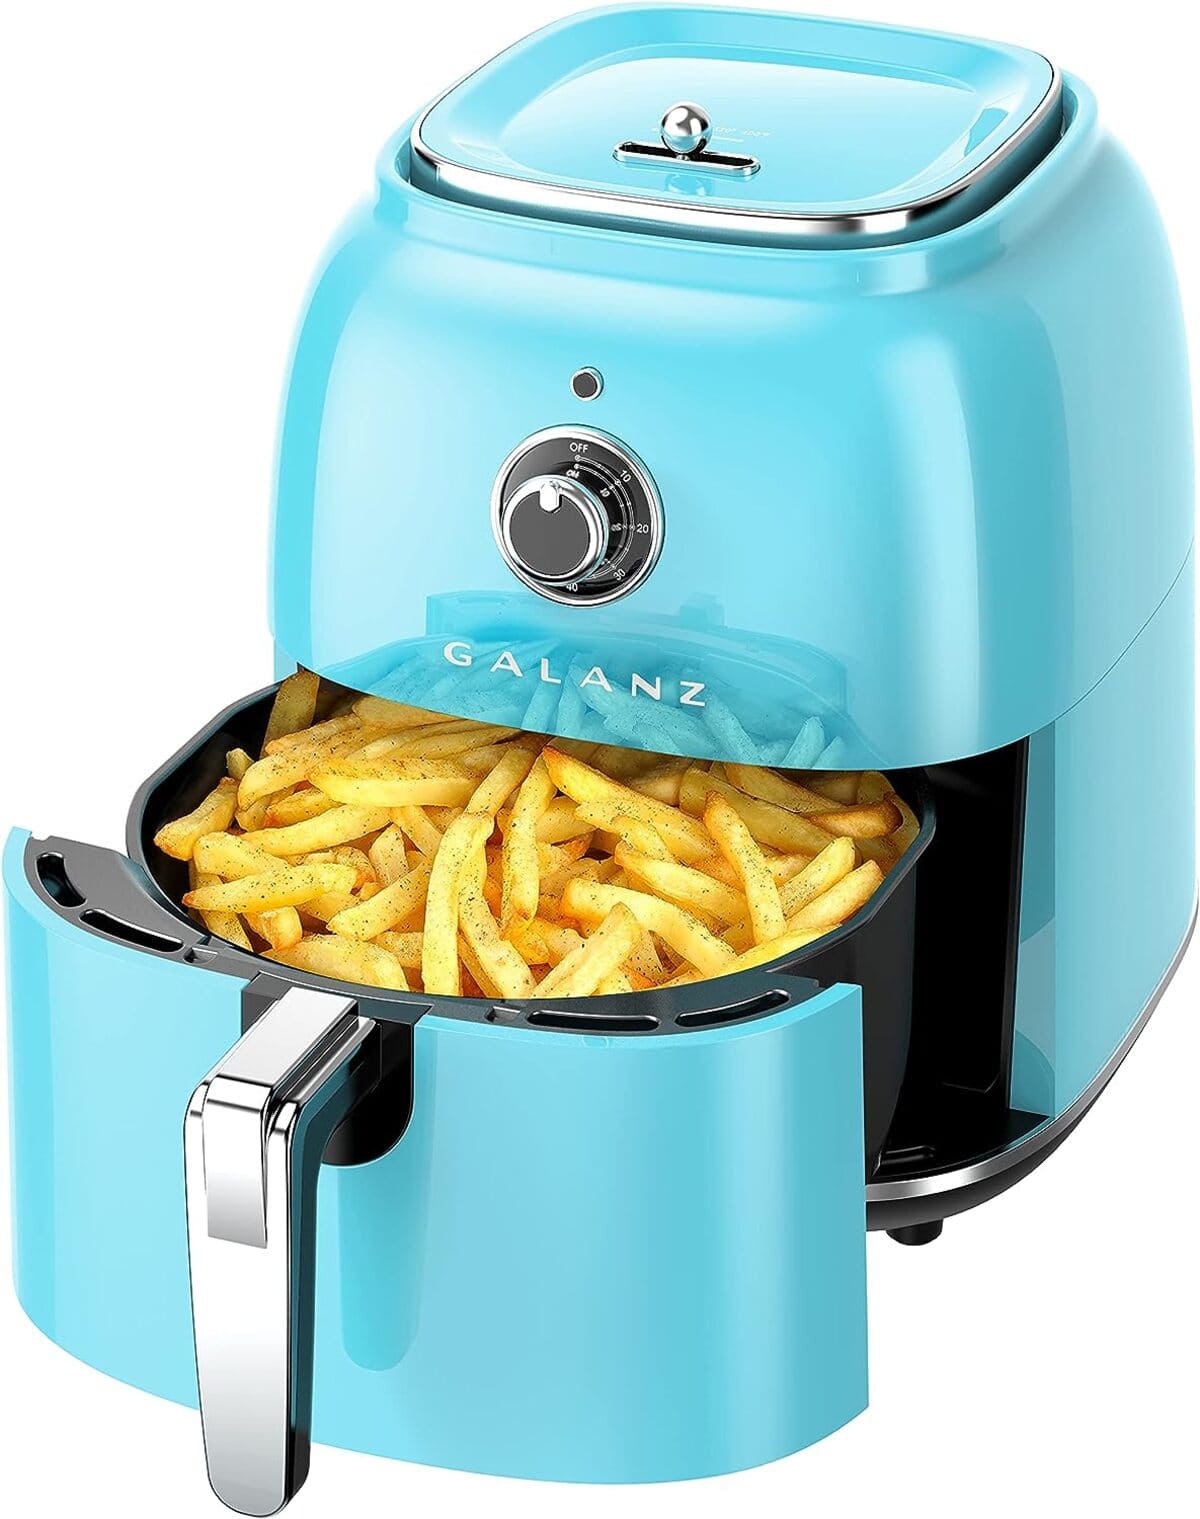 Galanz Retro Electric Air Fryer with Non-Stick Basket